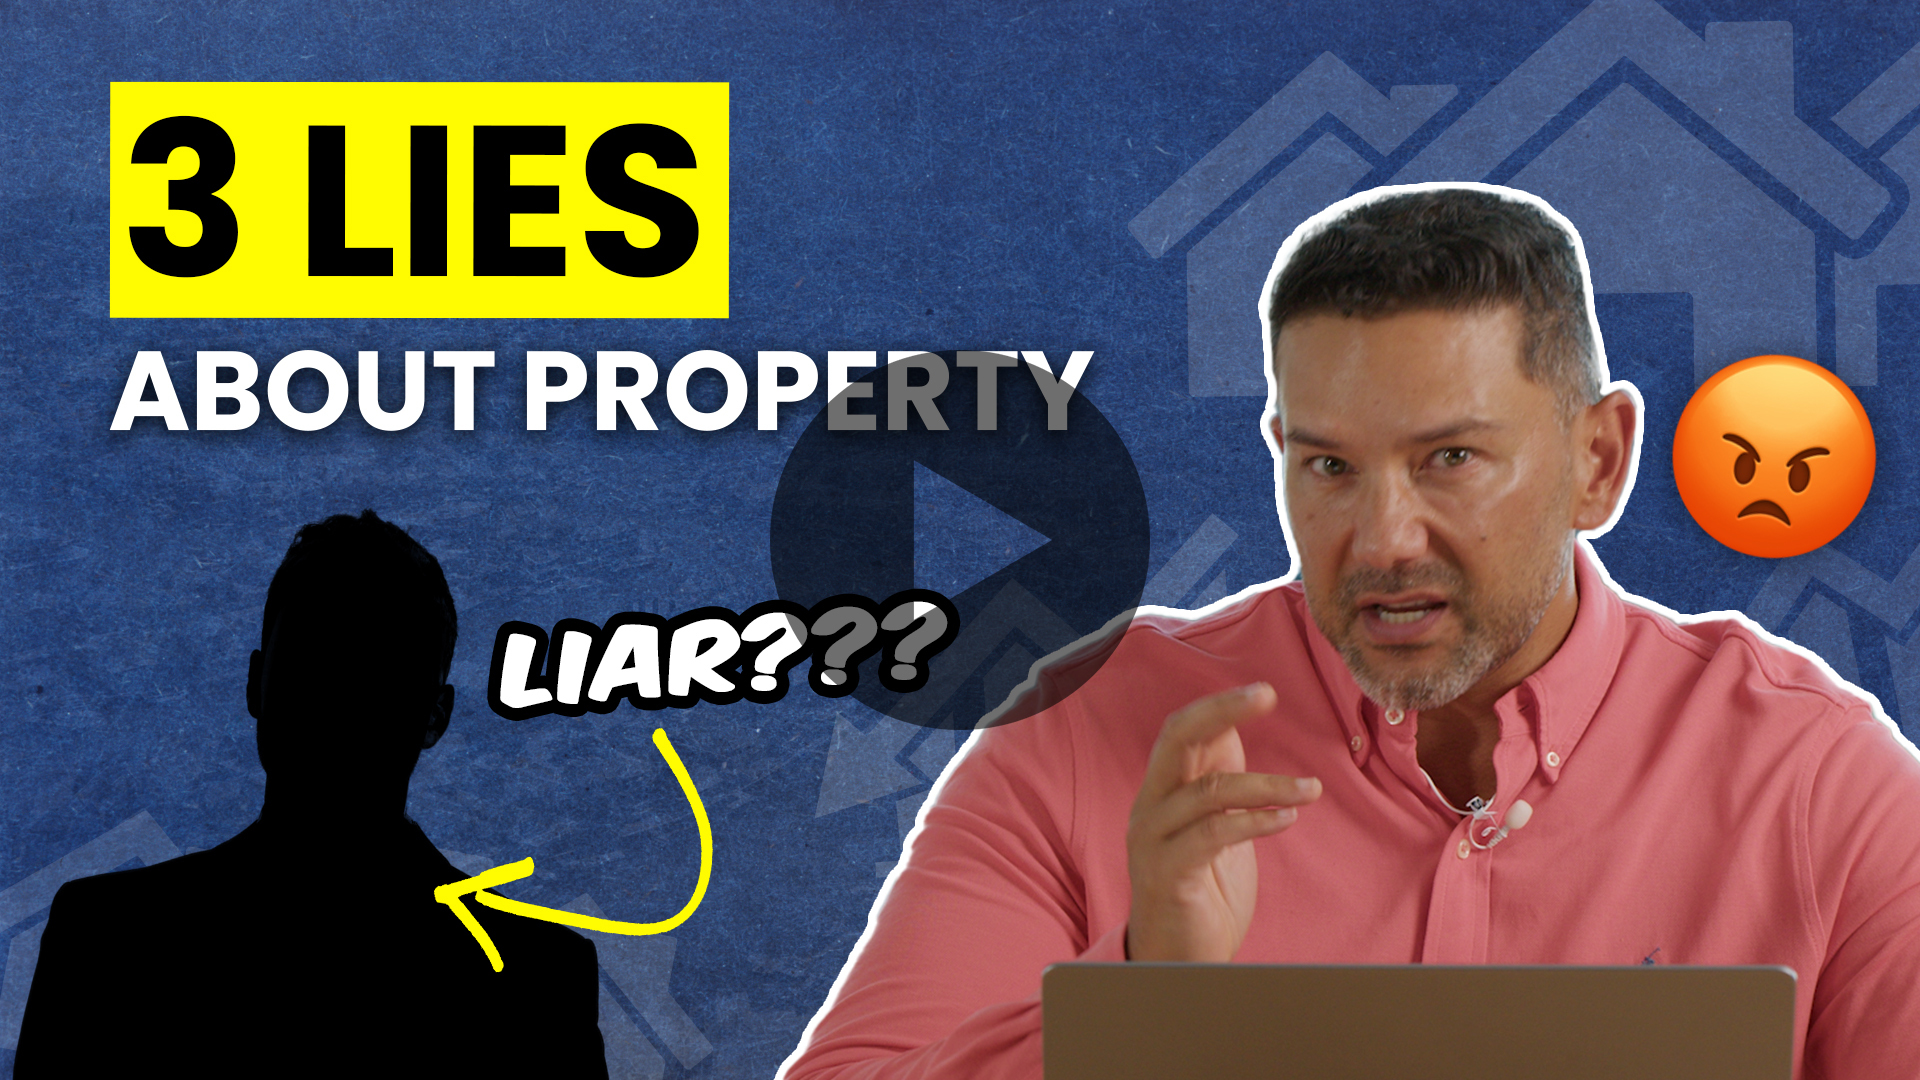 3 Lies About Property email banner